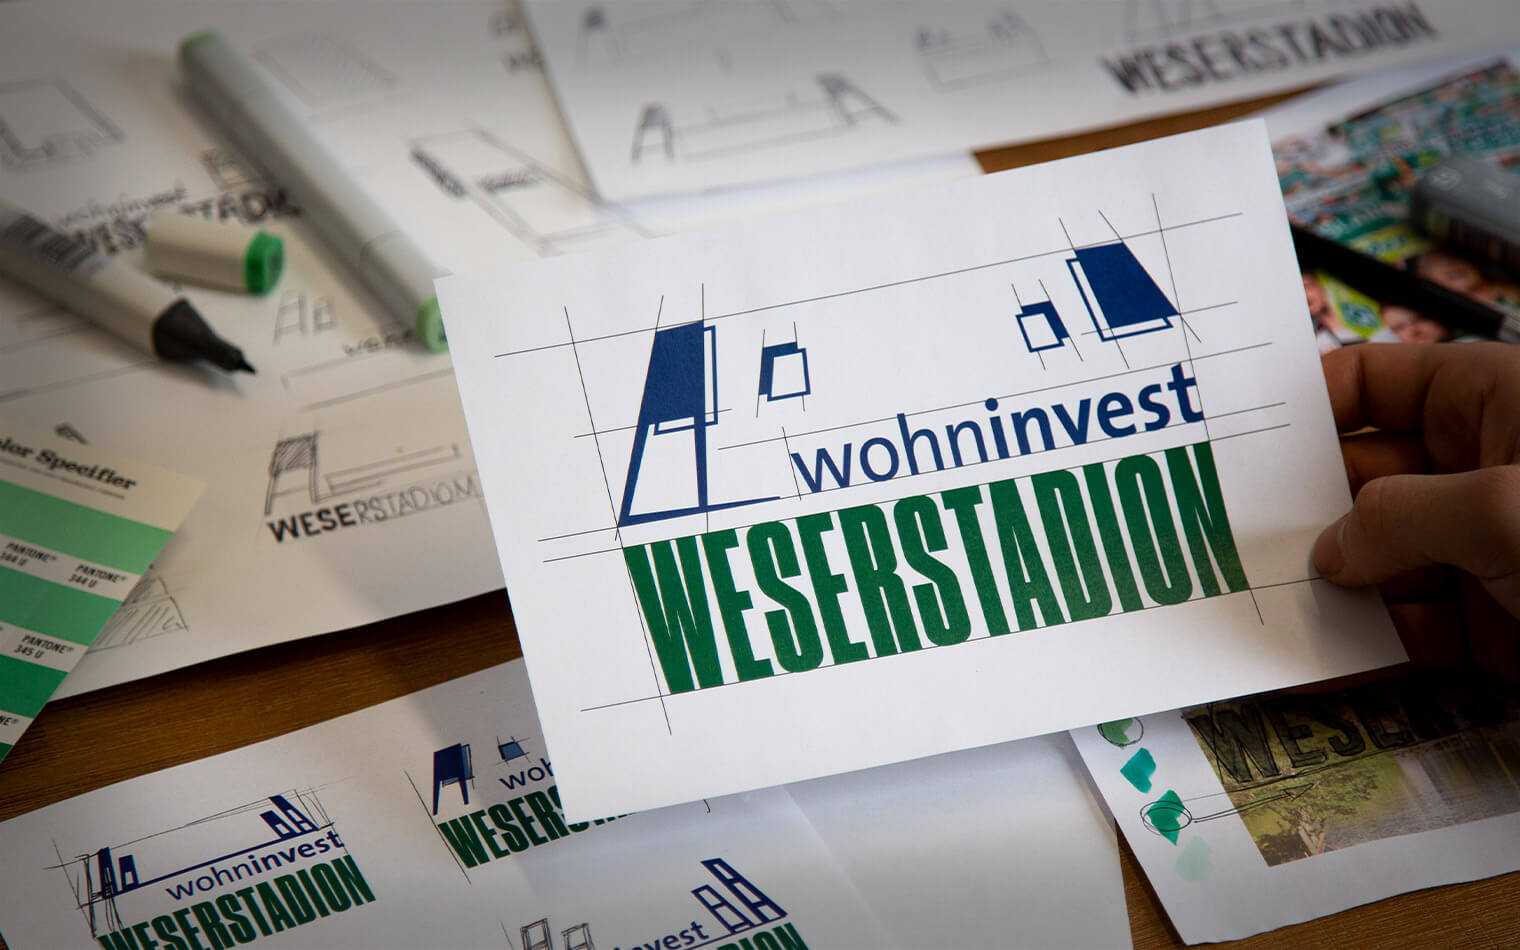 This picture shows the process for the logo of the wohninvest WESERSTADION.